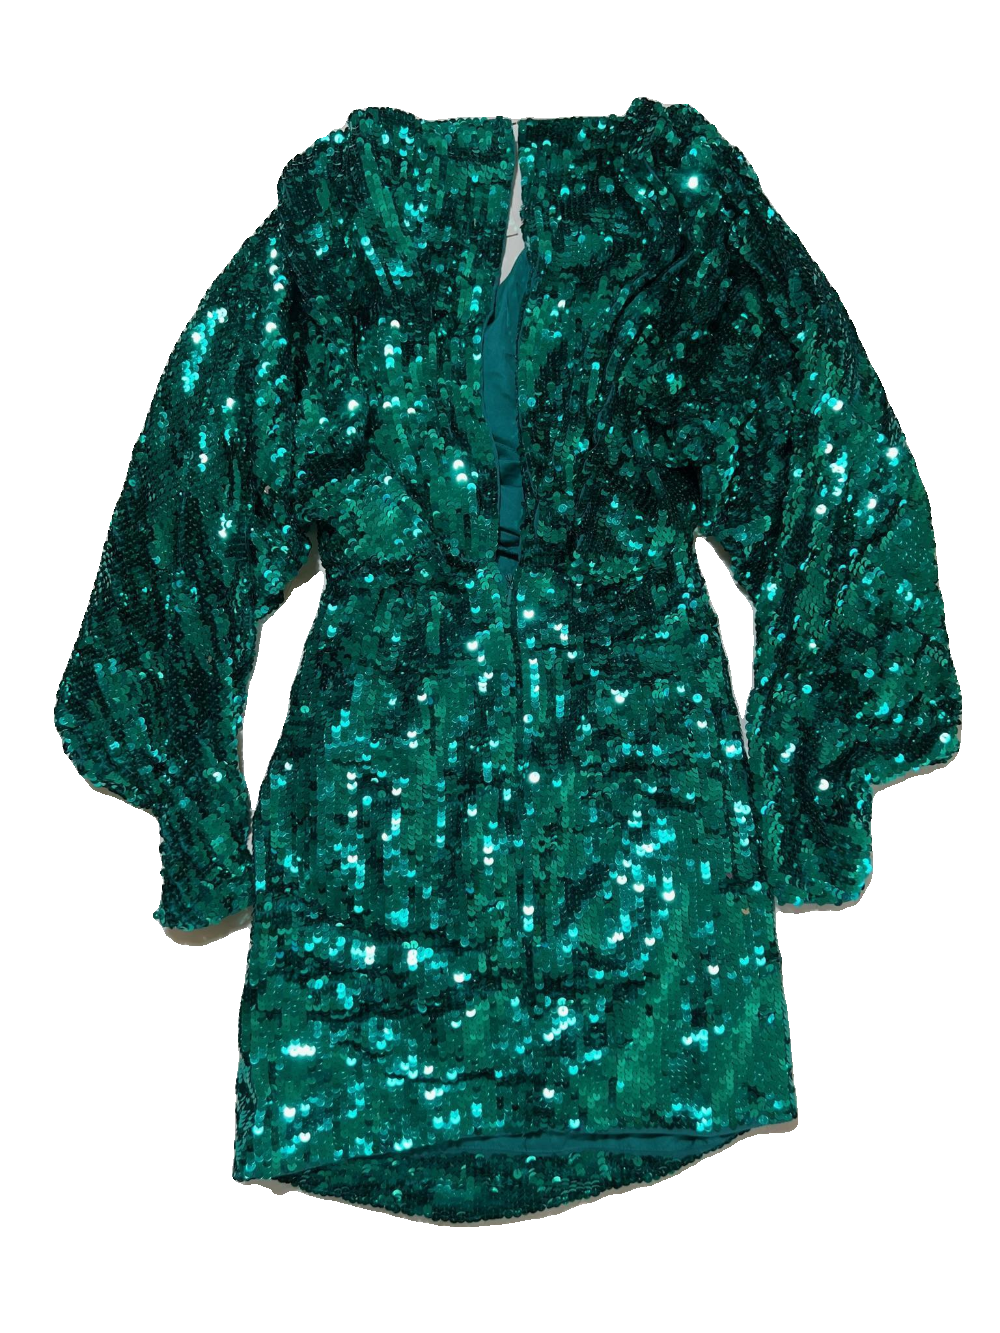 Asos- Green Sequin Mini Dress NEW WITH TAGS